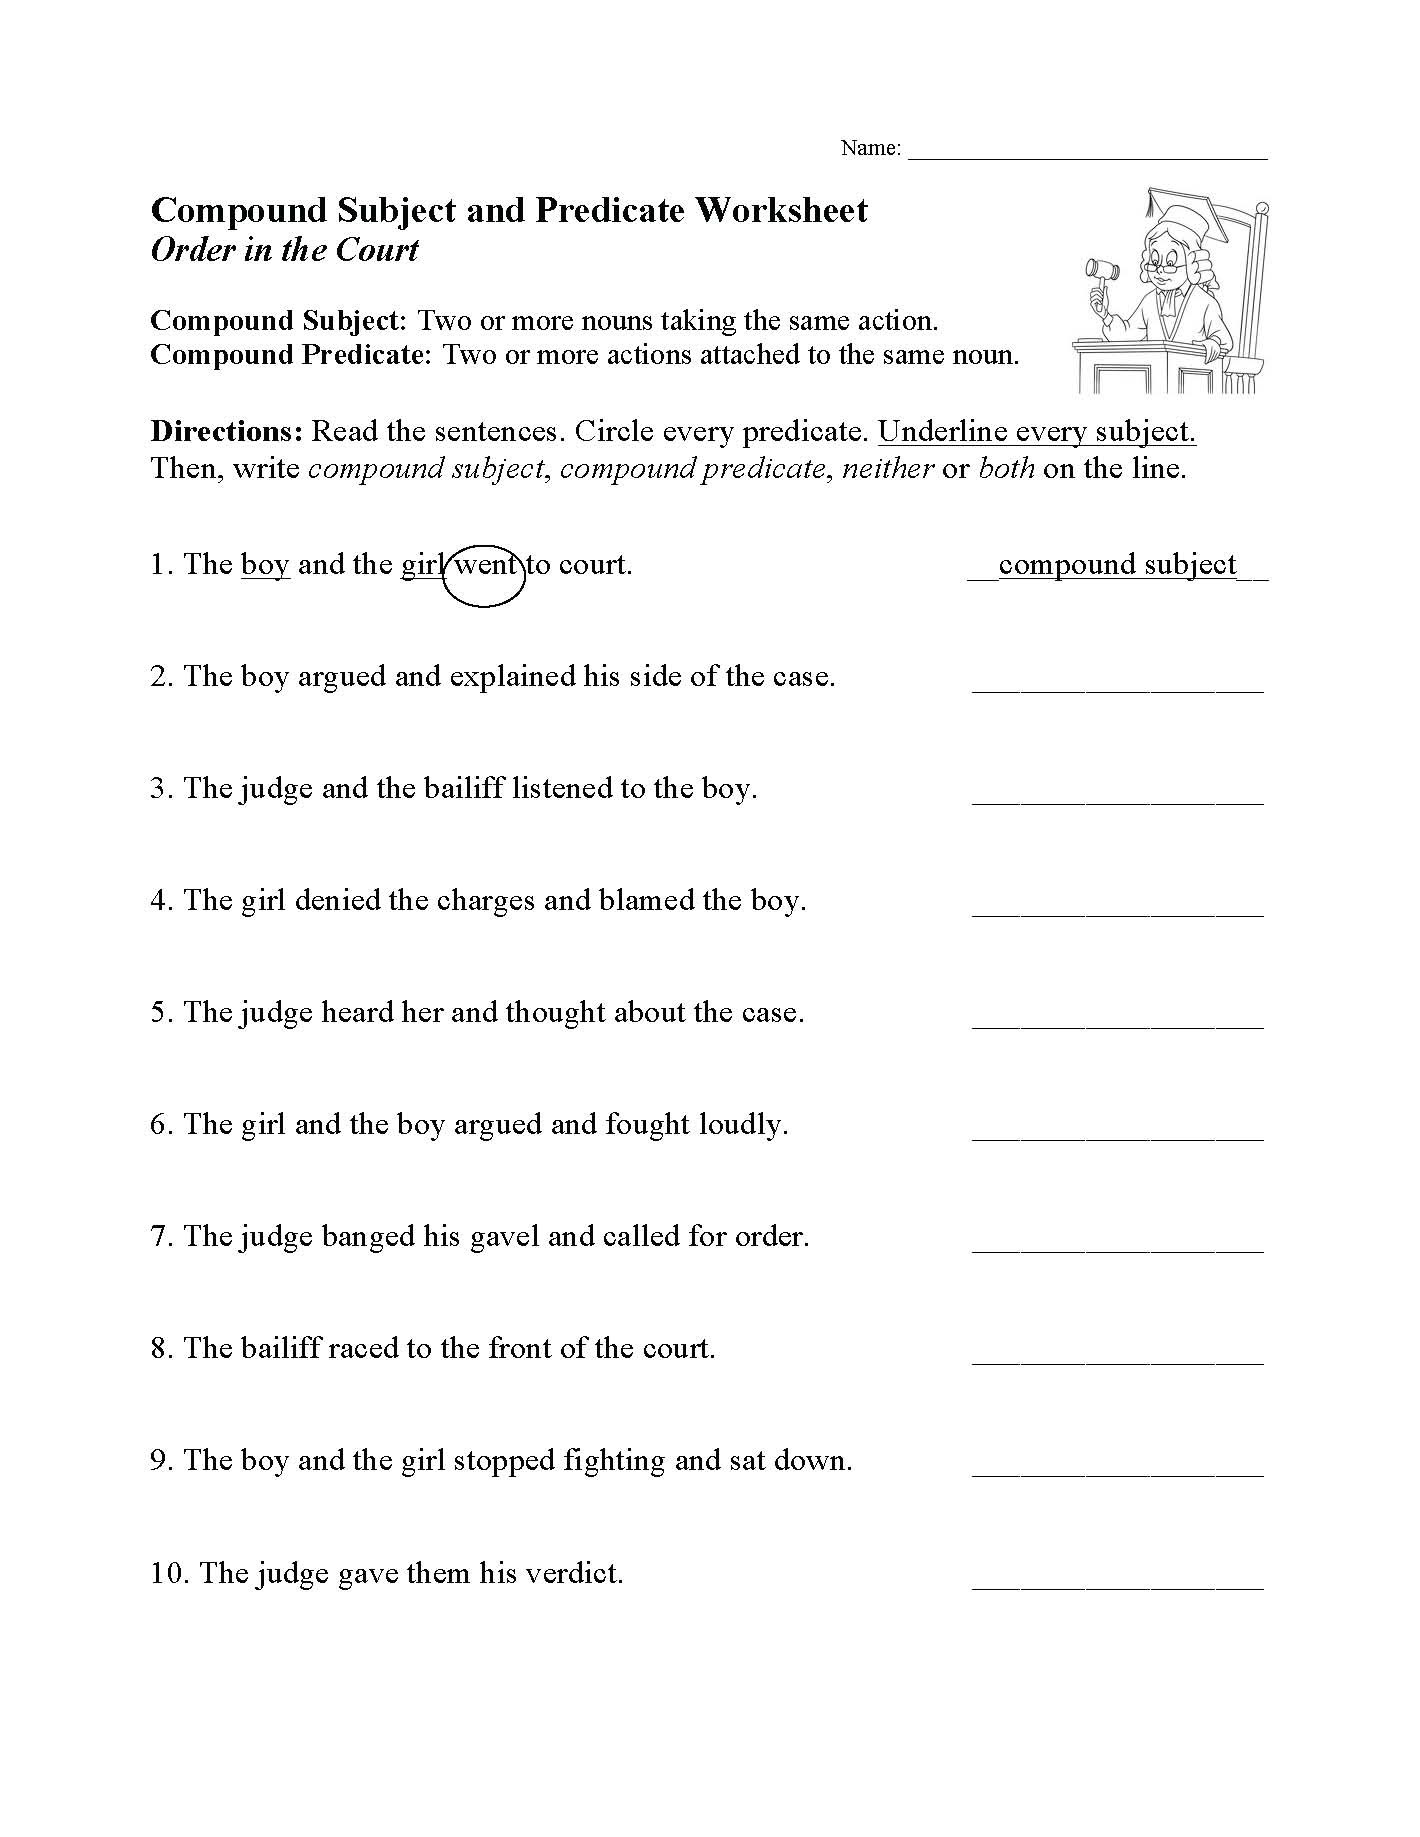 This is a preview image of one of our Sentence Structure Worksheets. Click on it to view all of our sentence structure worksheets.